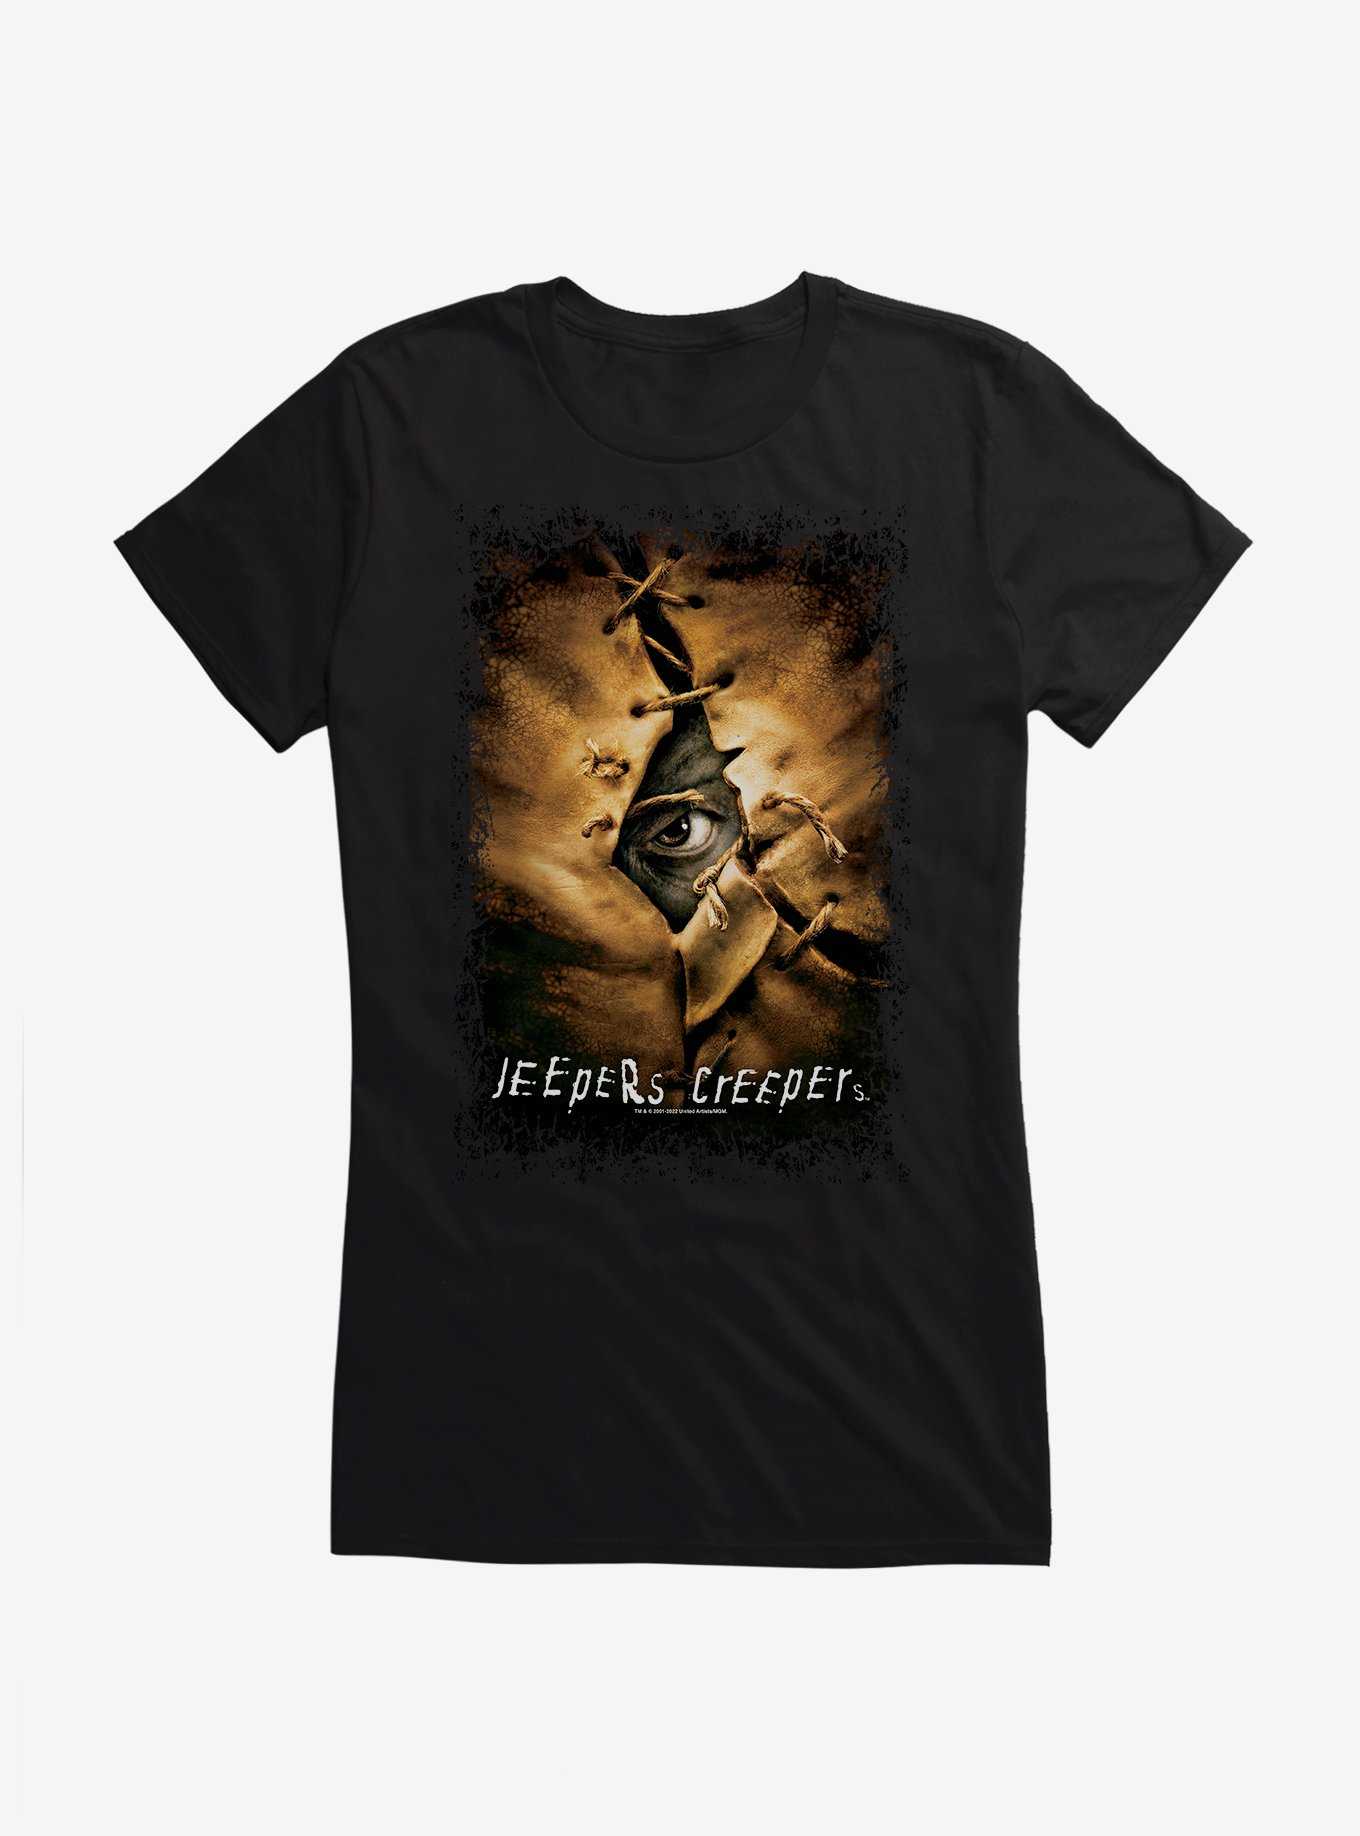 Jeepers Creepers Poster Girls T-Shirt, , hi-res